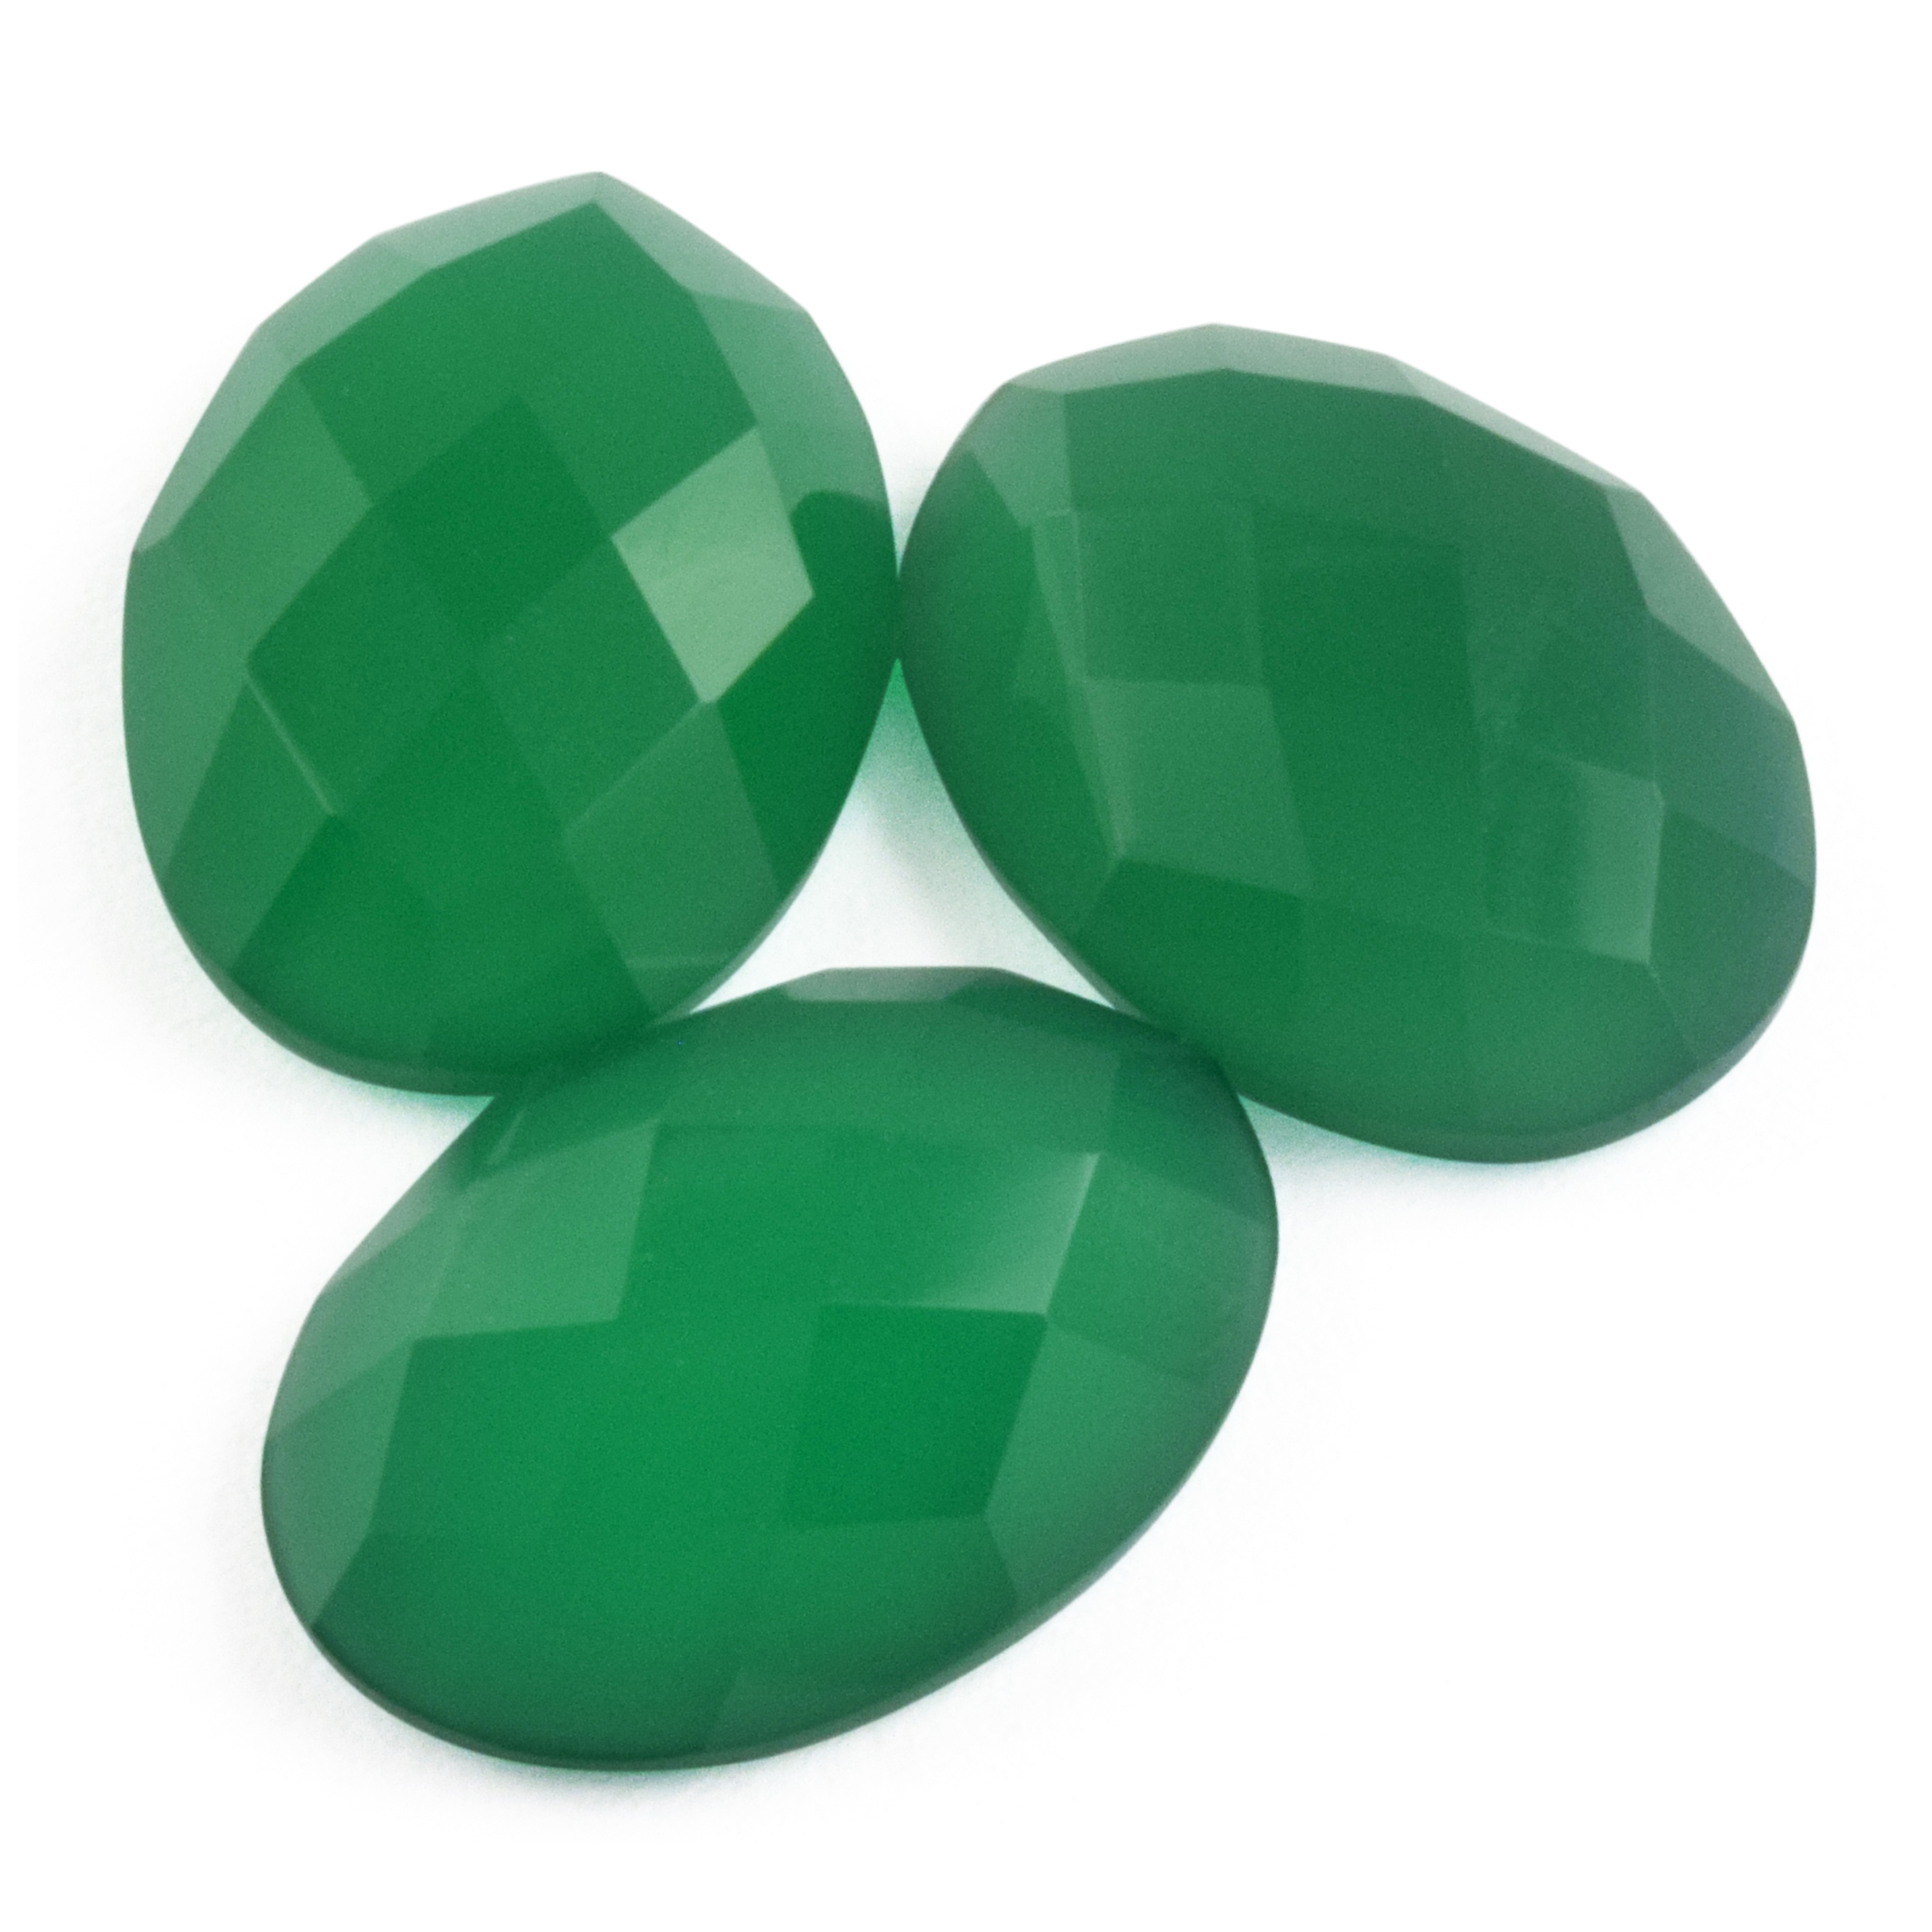 Details about   Lovely Lot Natural Green Onyx 6X6 mm Round Faceted Cut  Loose Gemstone 